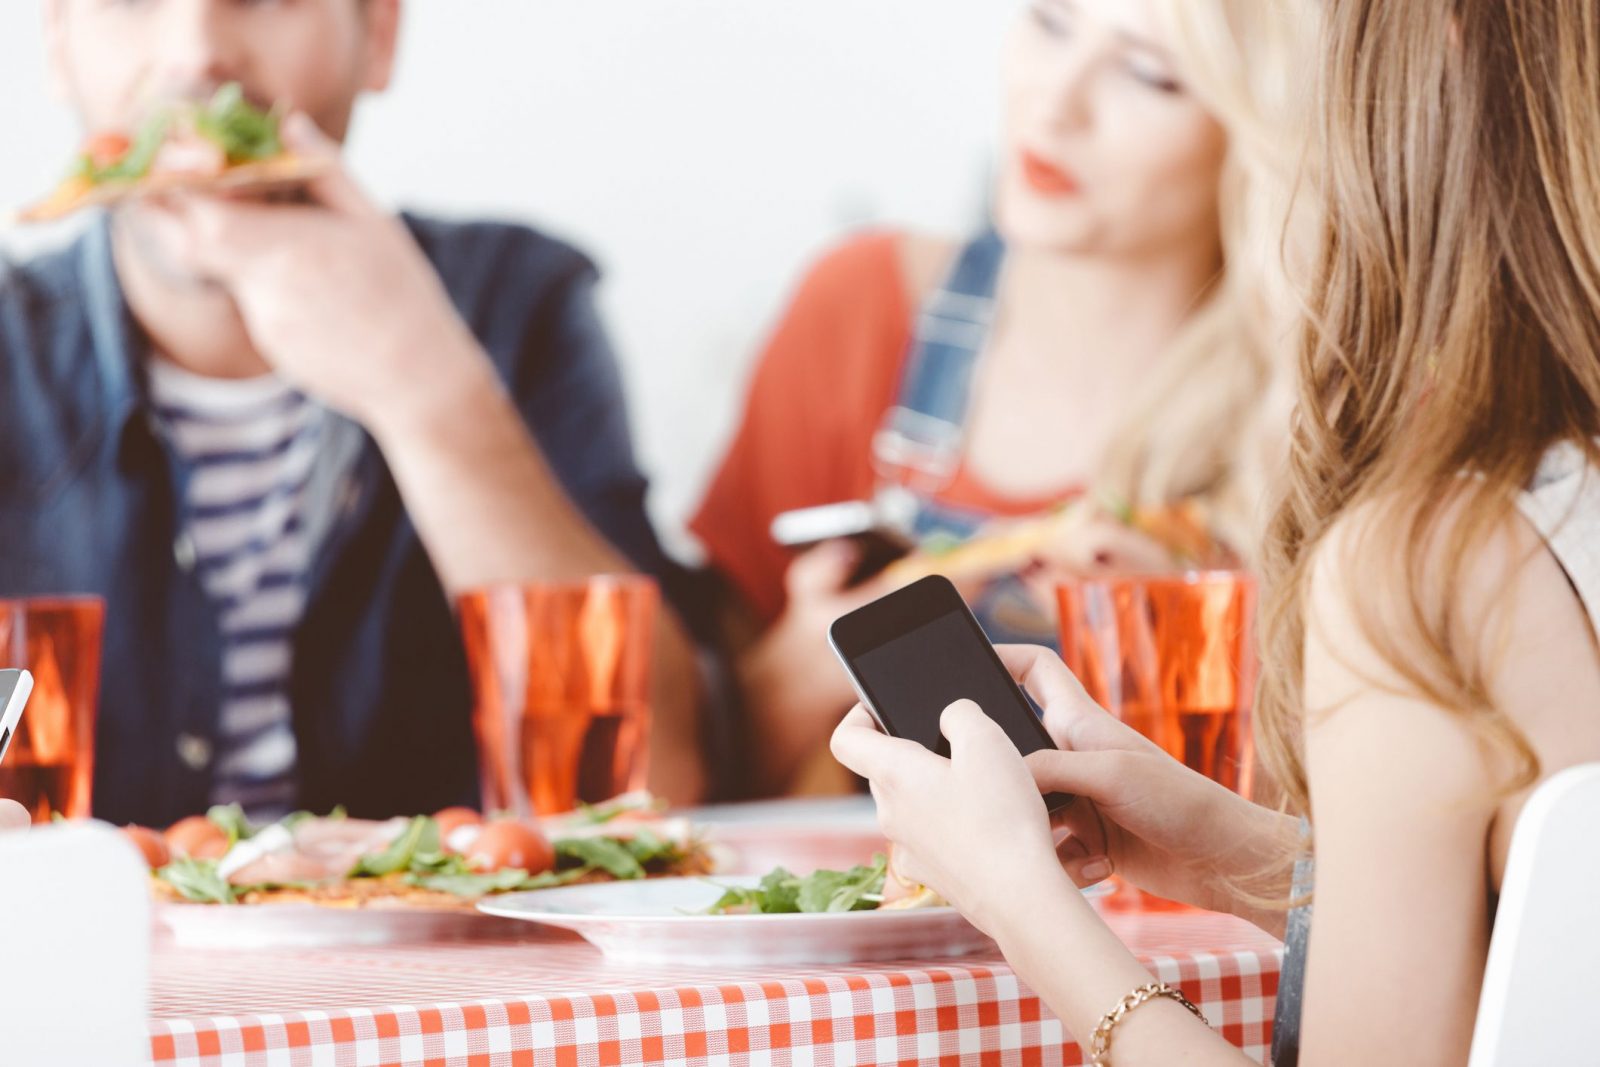 Respond to These Texts and We’ll Reveal Your True Emotional Age Friends Using Phone At Meal